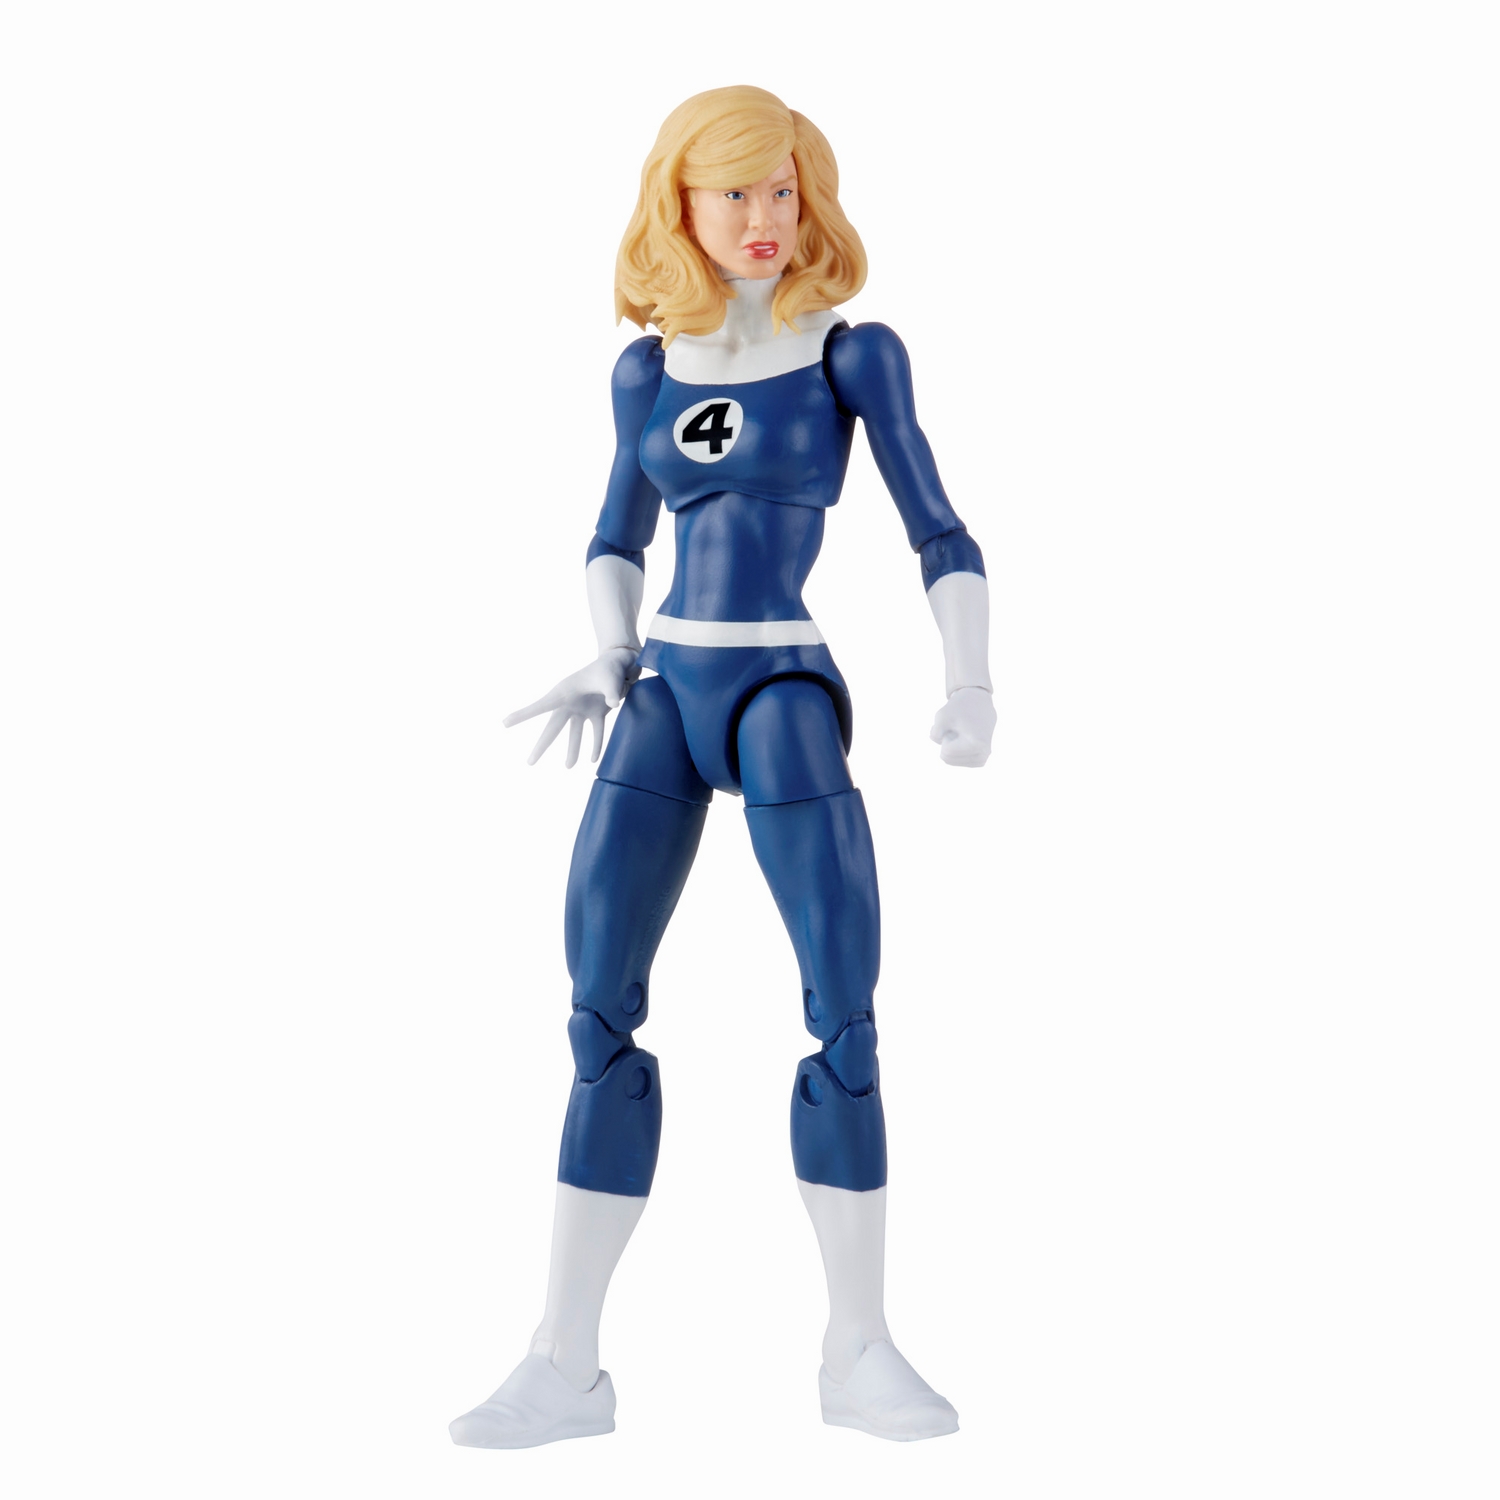 MARVEL LEGENDS SERIES 6-INCH RETRO FANTASTIC FOUR MARVEL'S INVISIBLE WOMAN Figure_oop 5.jpg